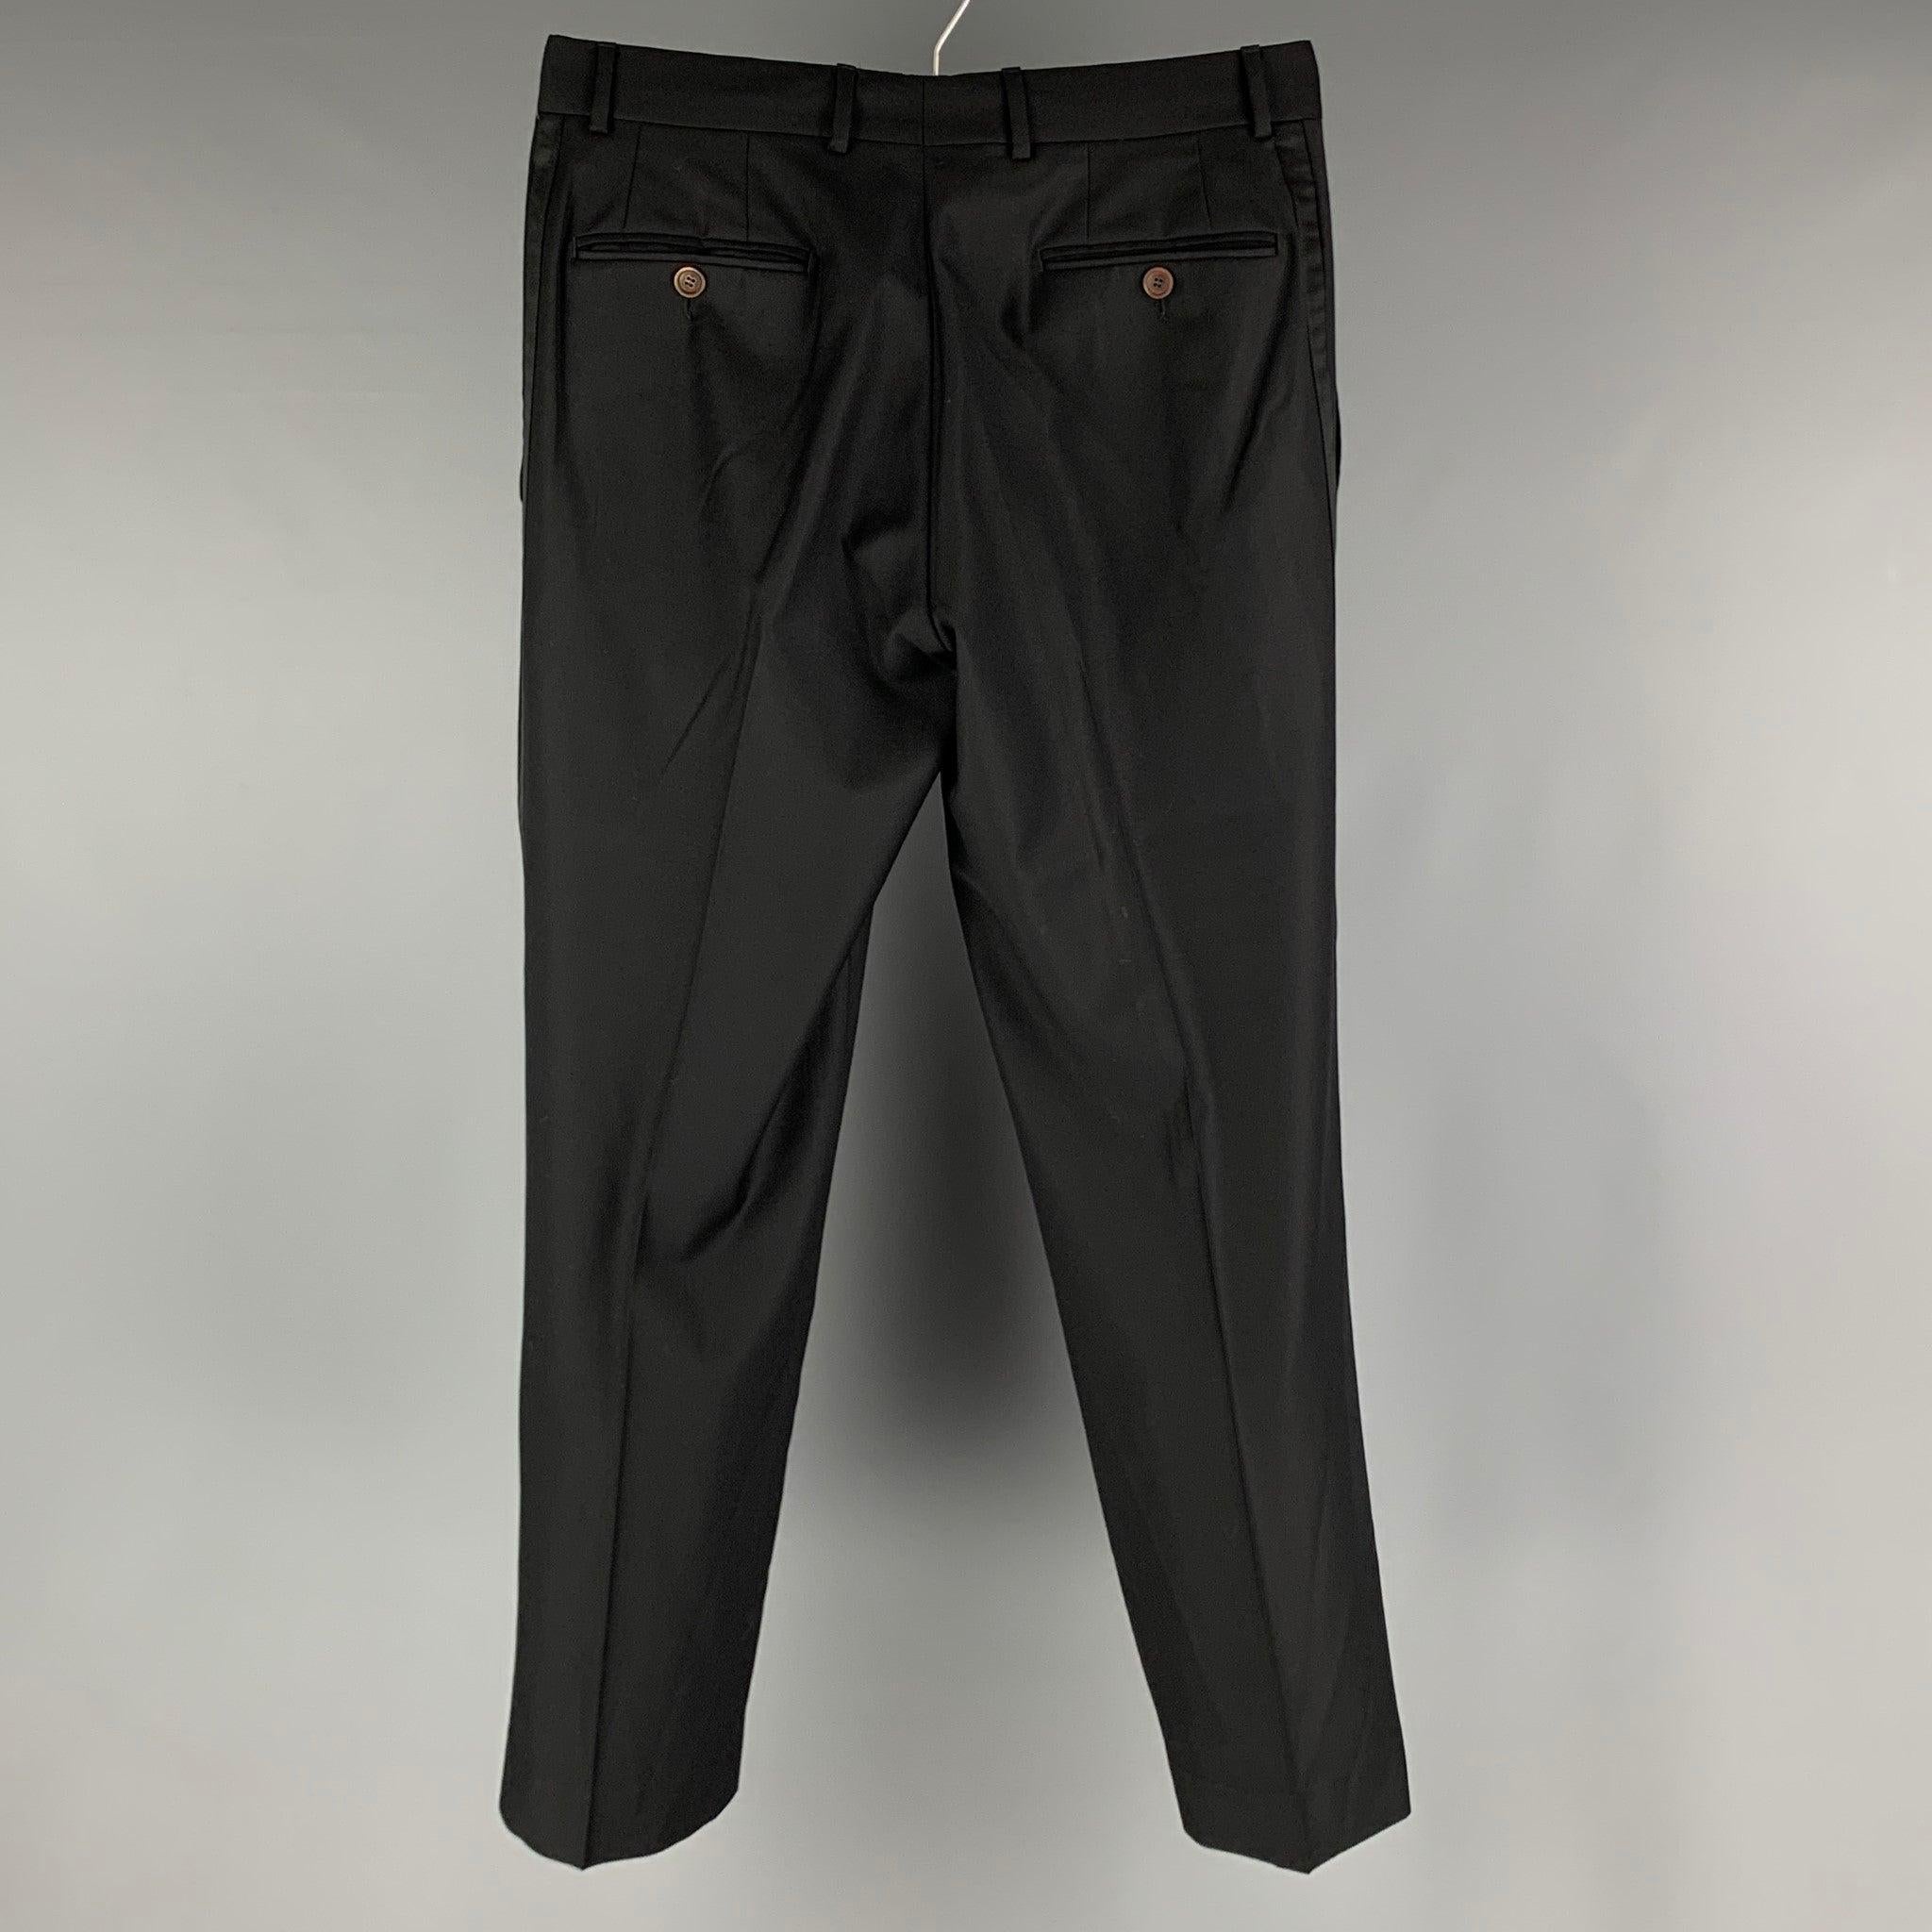 ETRO tuxedo dress pants come in a black wool twill woven material with a flat front, regula fit, zipper fly closure.
Excellent Pre-Owned Condition.
 

Marked:  52 

Measurements: 
 Waist: 32 inches Rise: 9.5 inches Inseam: 29 inches 
 
Leg Opening: